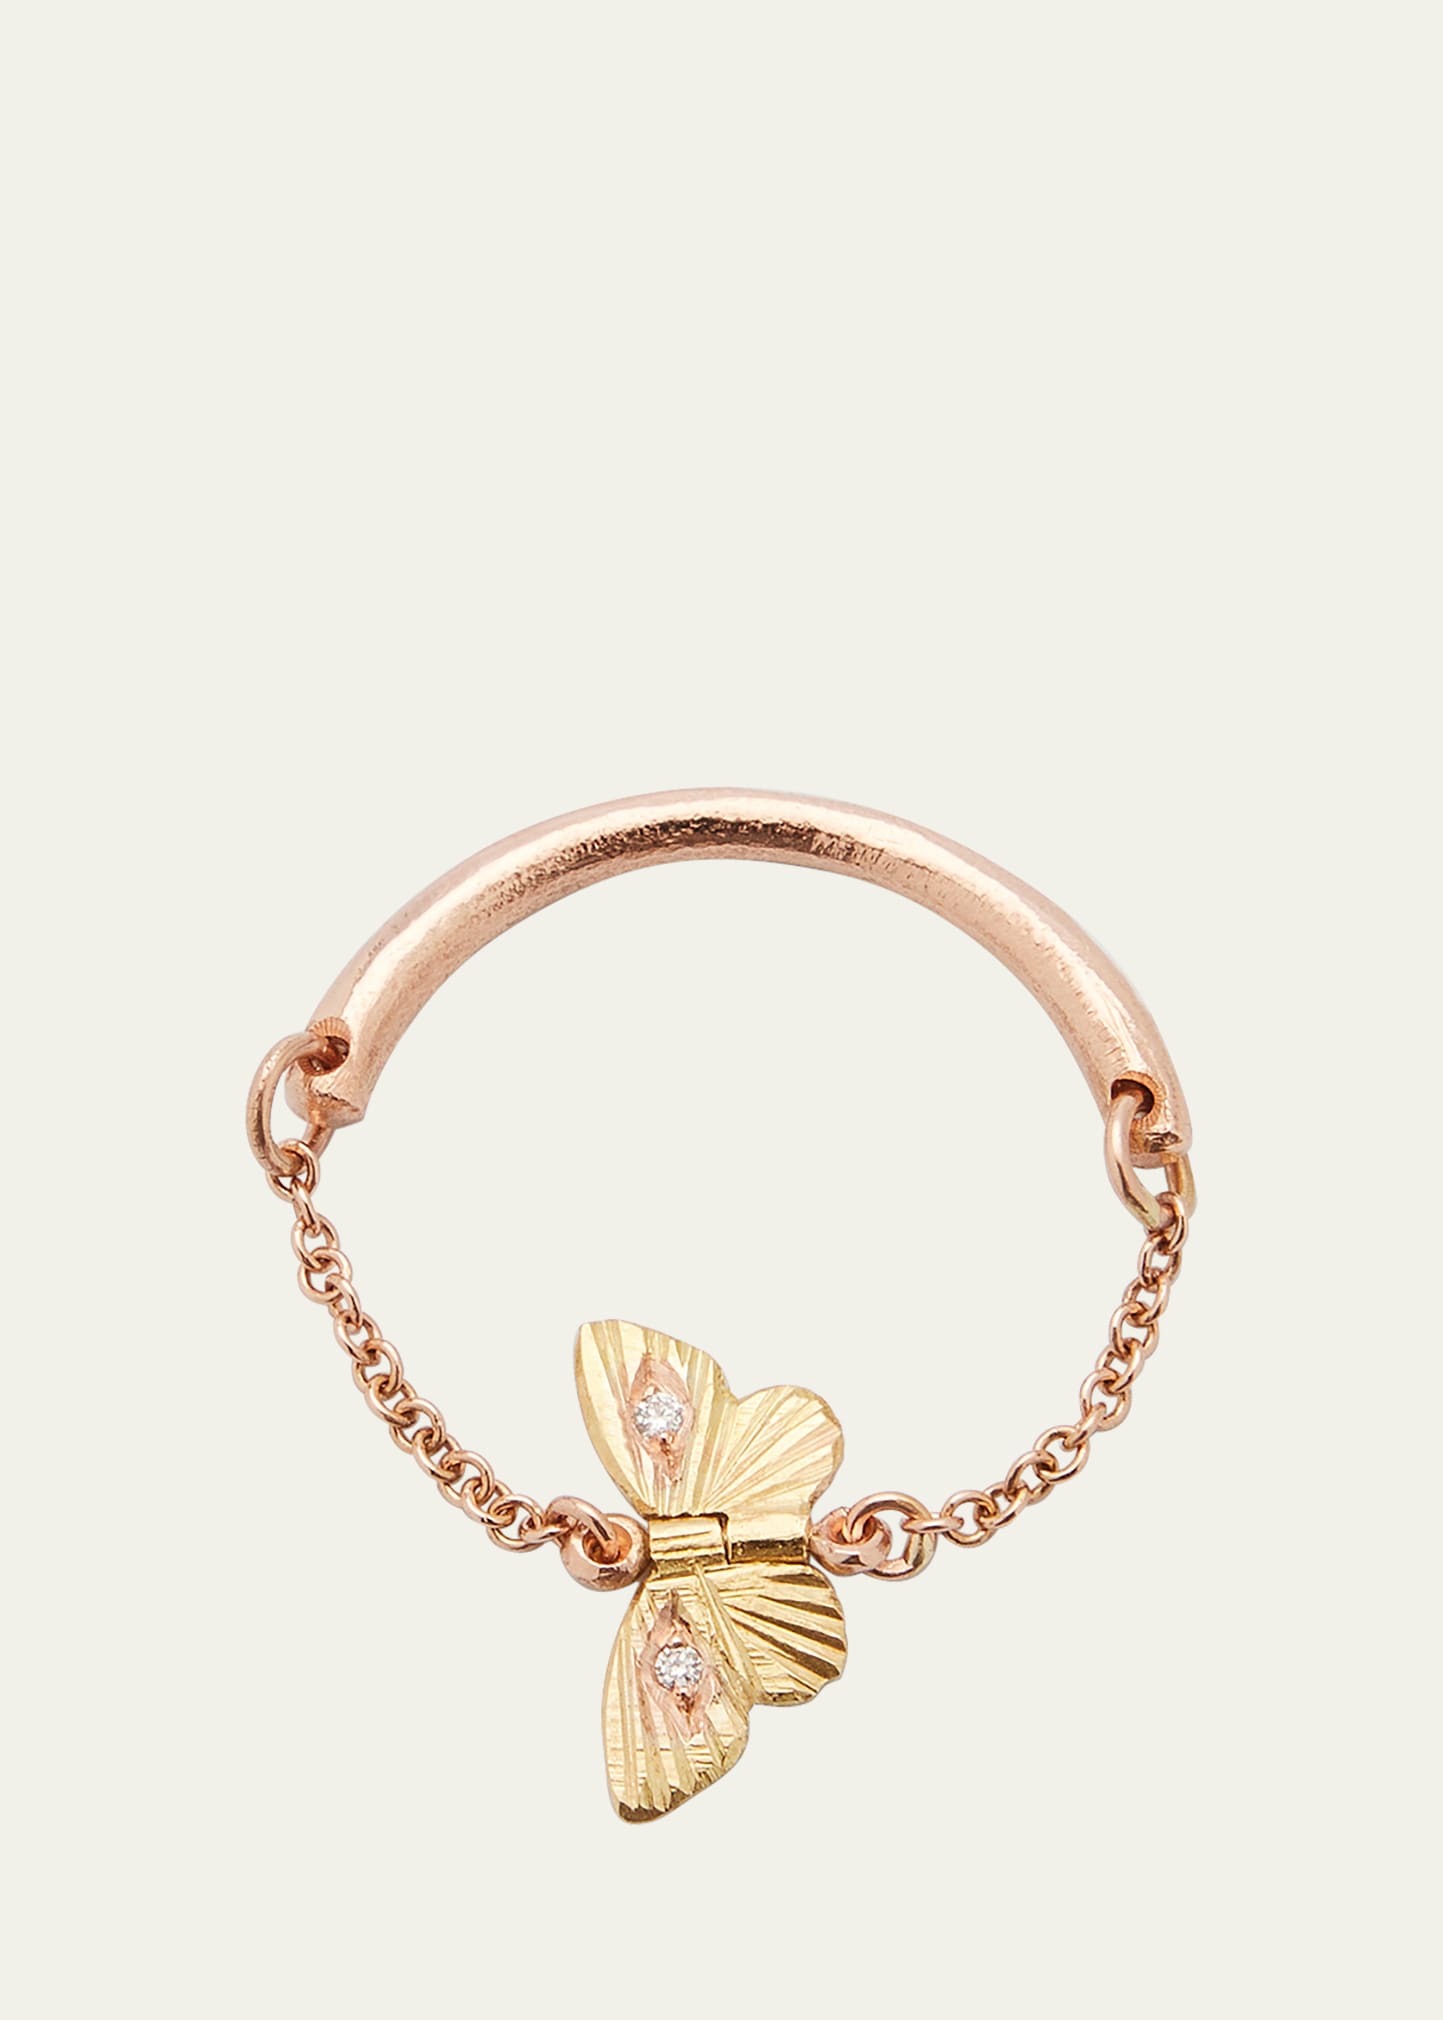 Migration Chain Ring in 18K Gold, 14k Rose Gold and White Diamonds